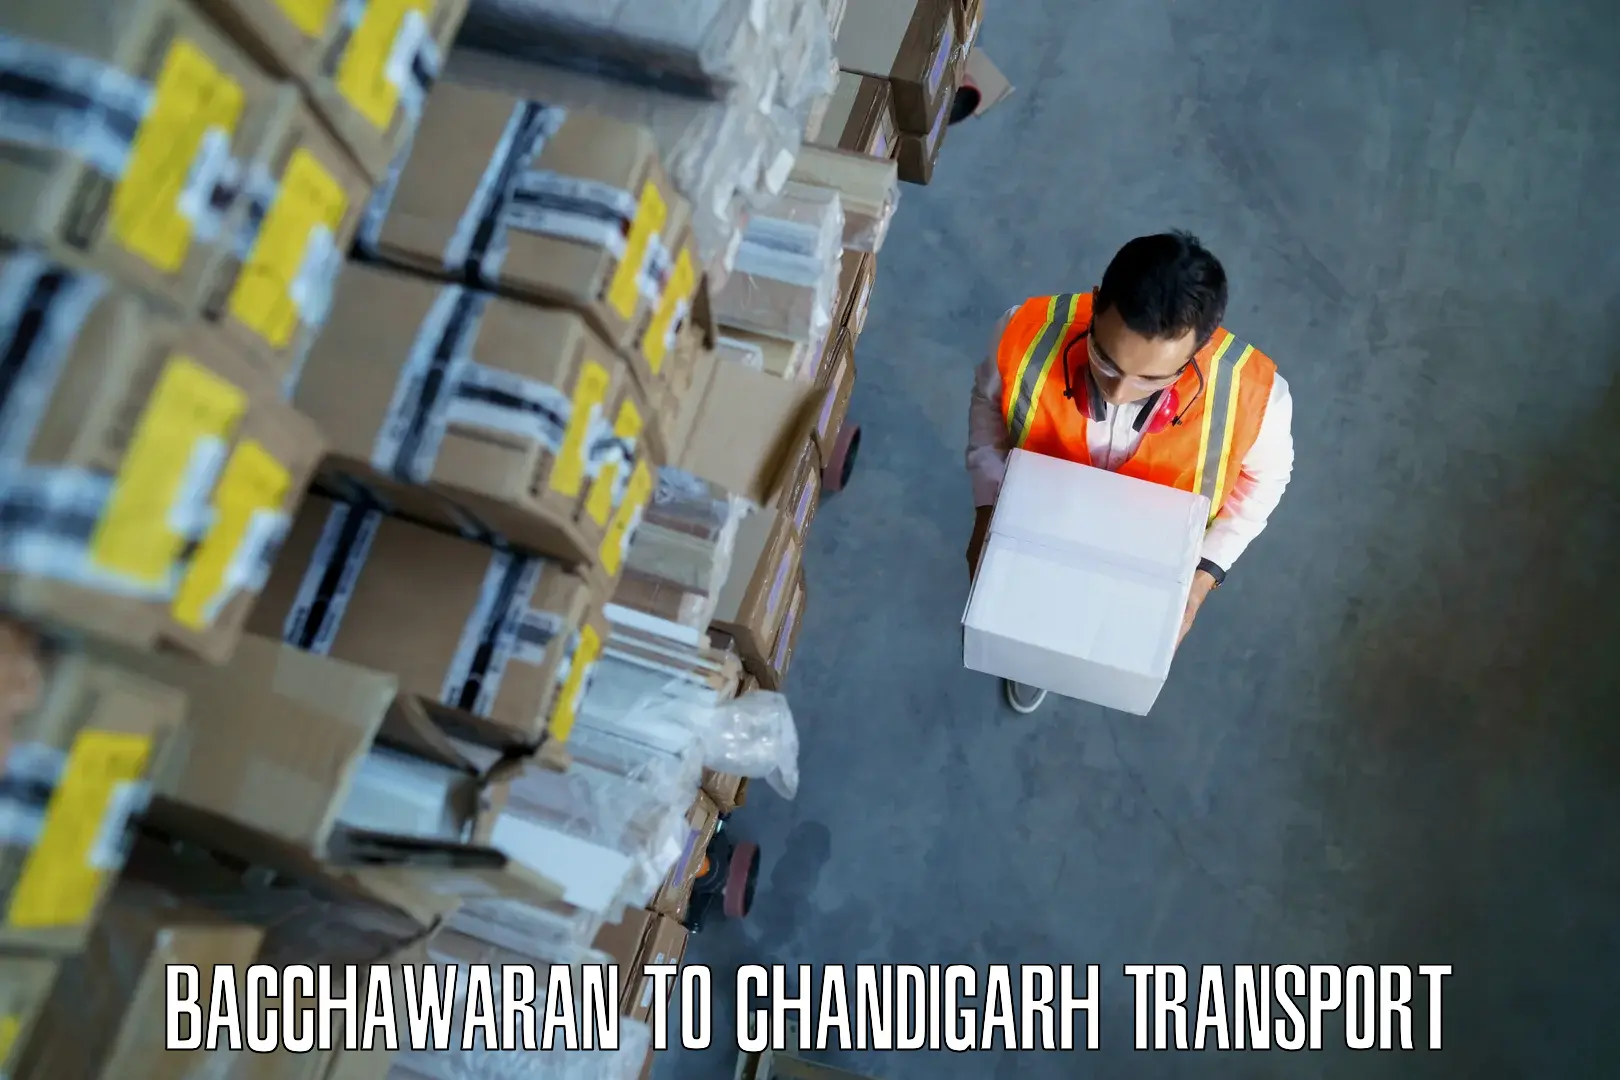 Delivery service Bacchawaran to Chandigarh